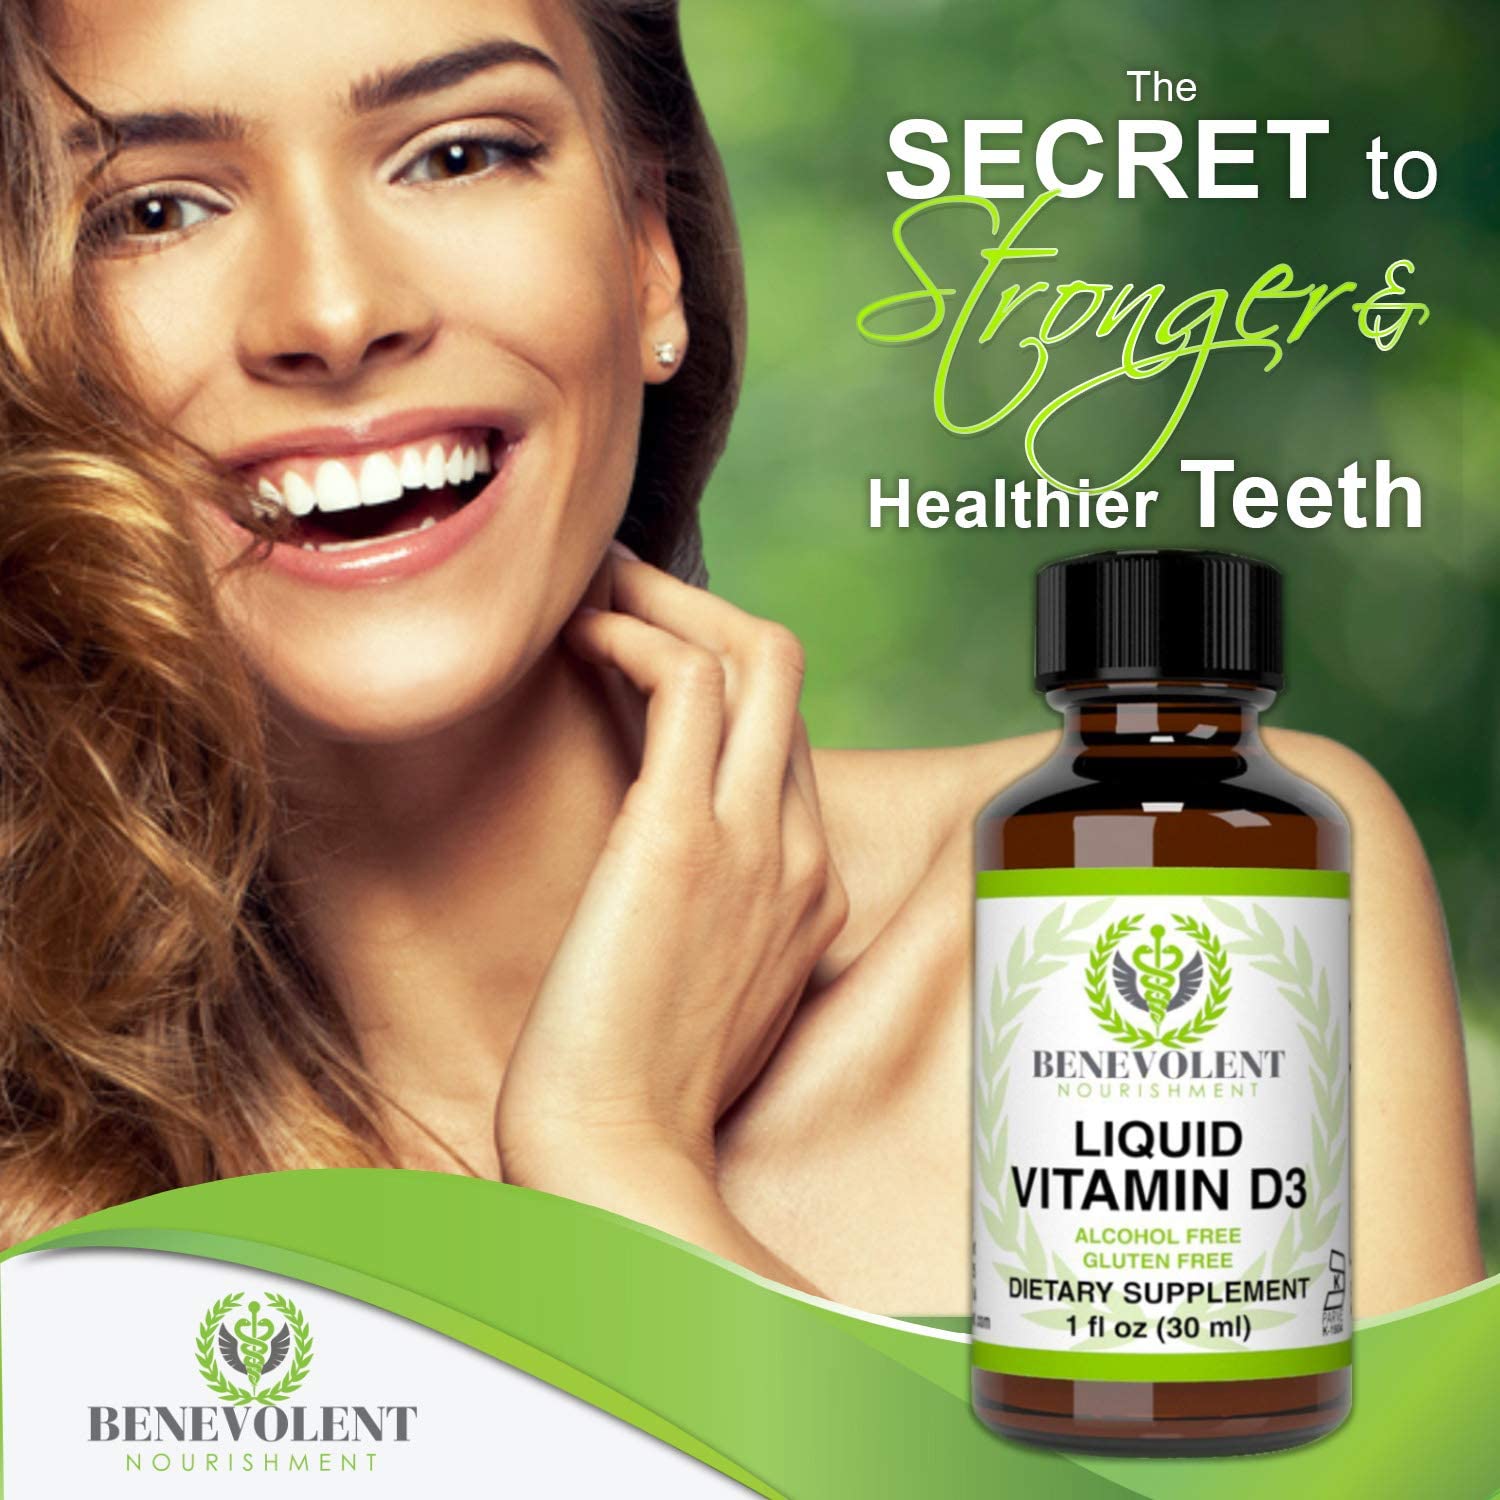 The secret to stronger and healthier teeth